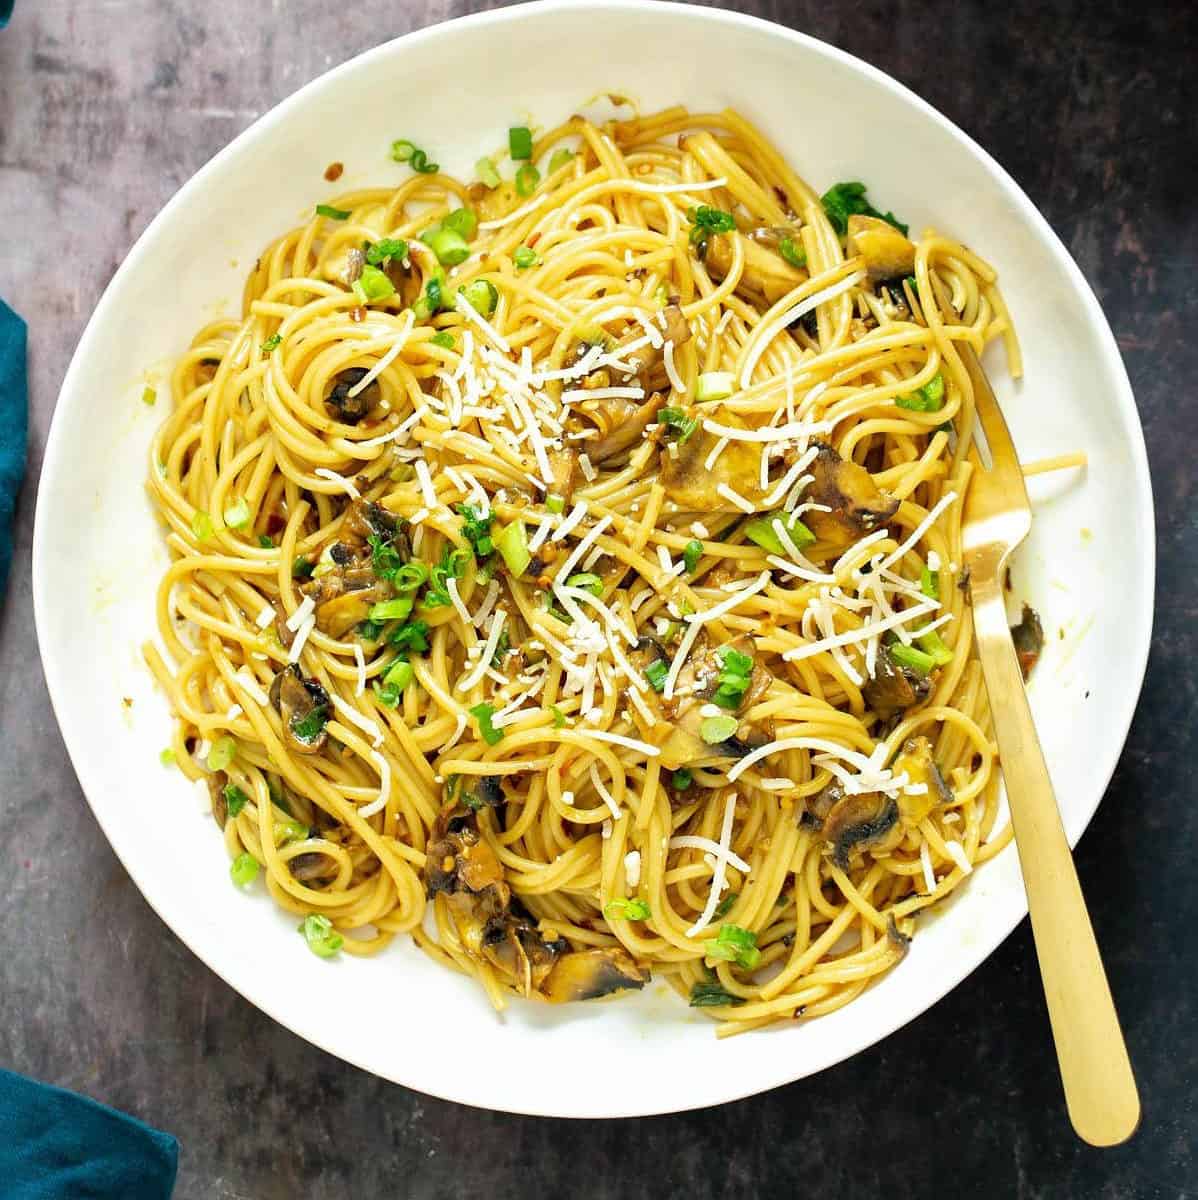  This plate of Vegan Garlic Asian Noodles is a harmony of flavors that will make your taste buds dance.